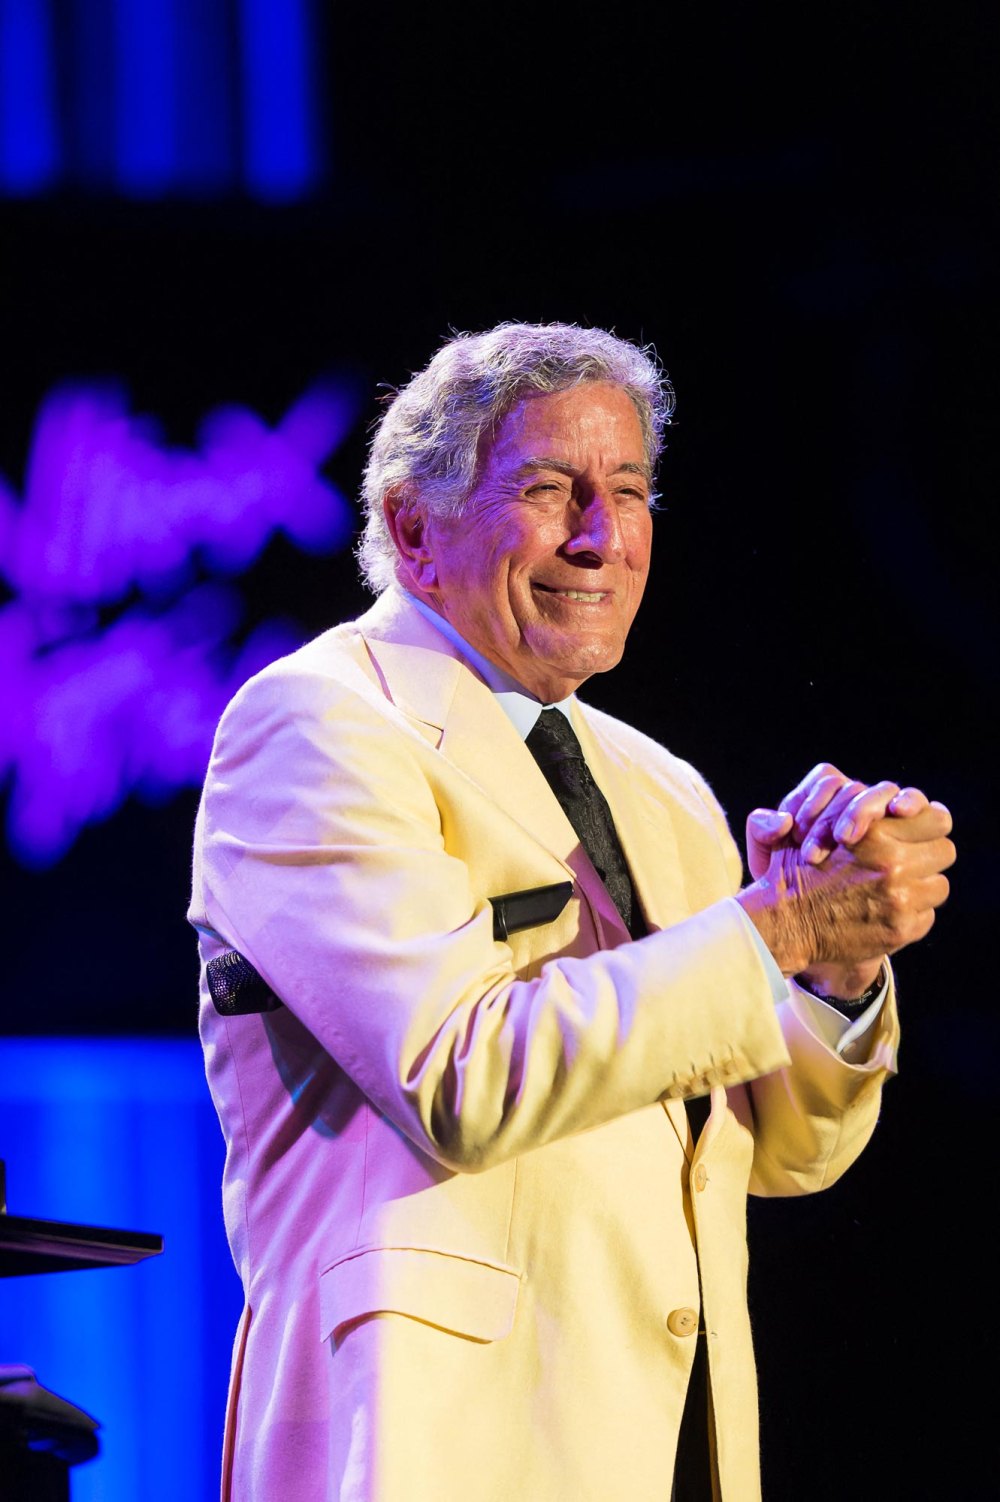 Tony Bennett s Family Say Late Singer Delighted in Making People Happy in Fan Thank You 293